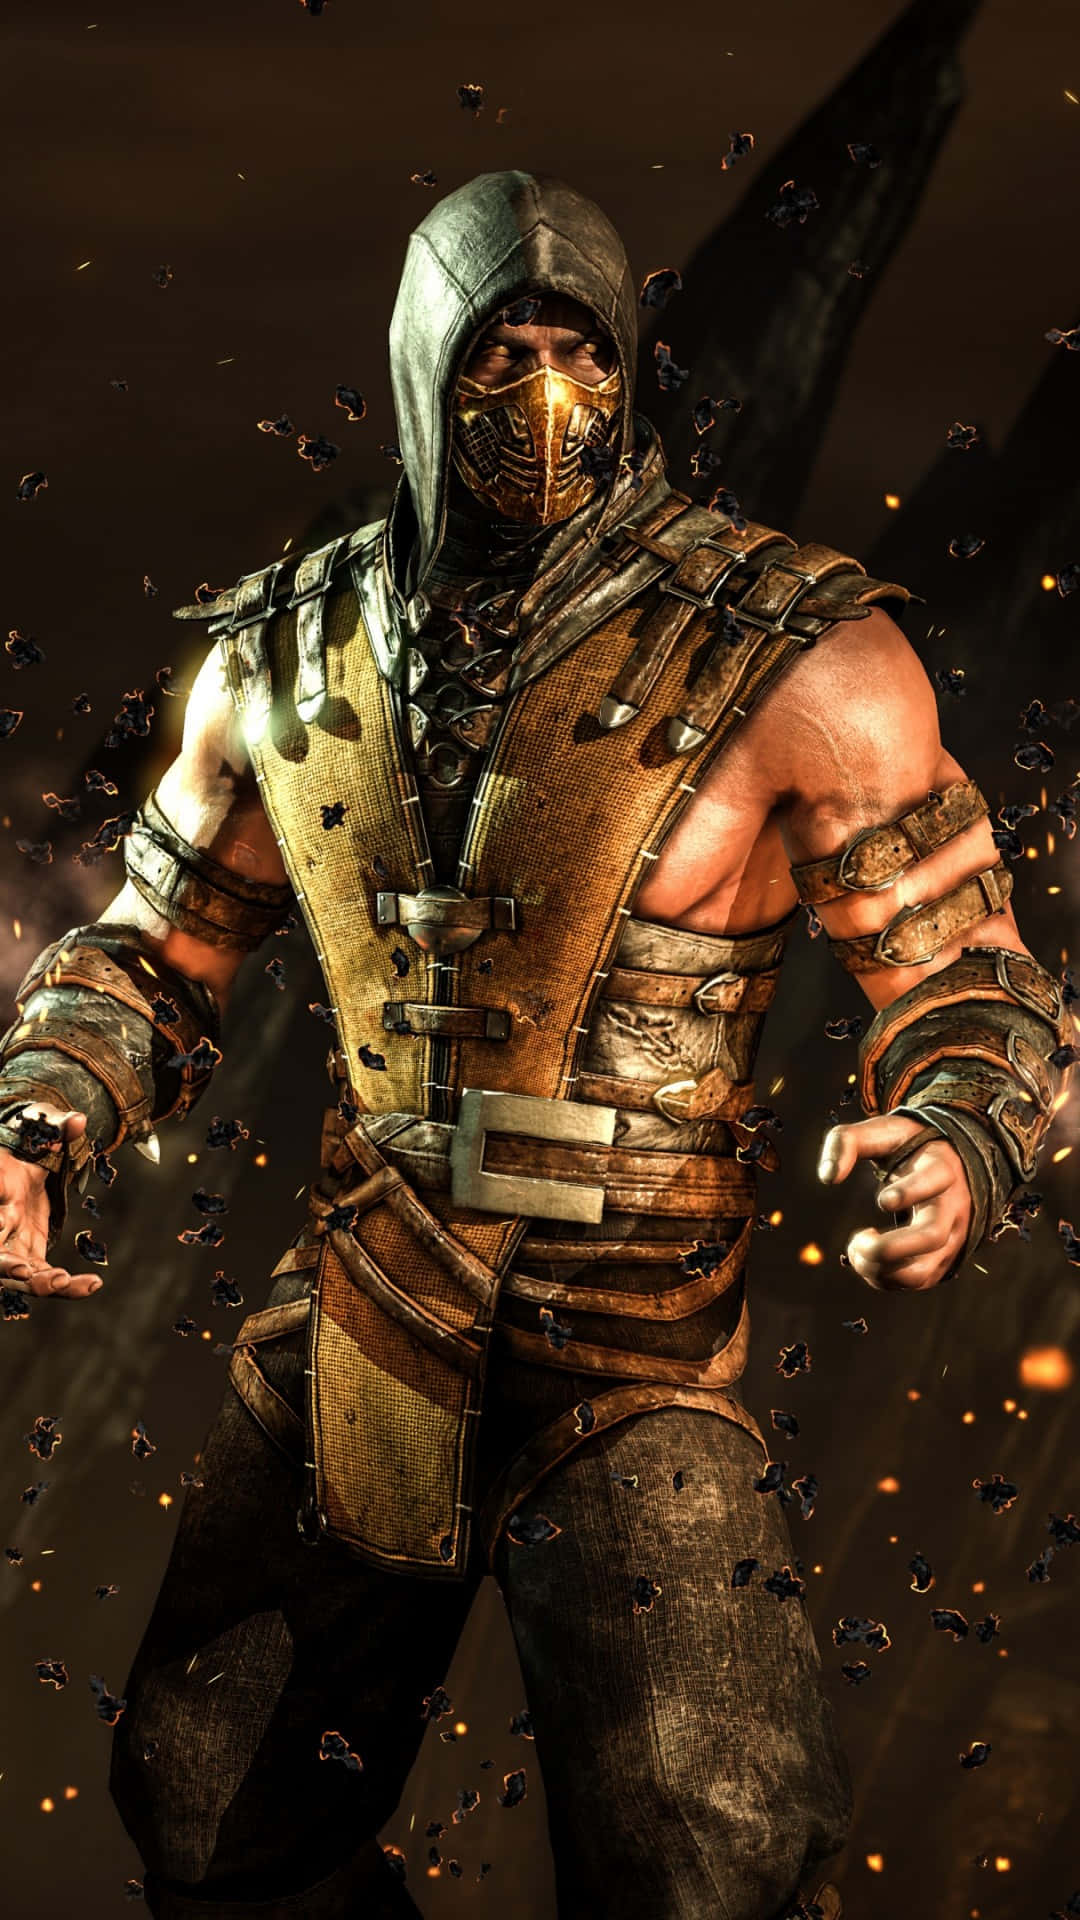 Scorpion from Mortal Kombat Brings New Heights of Action and Adventure Wallpaper